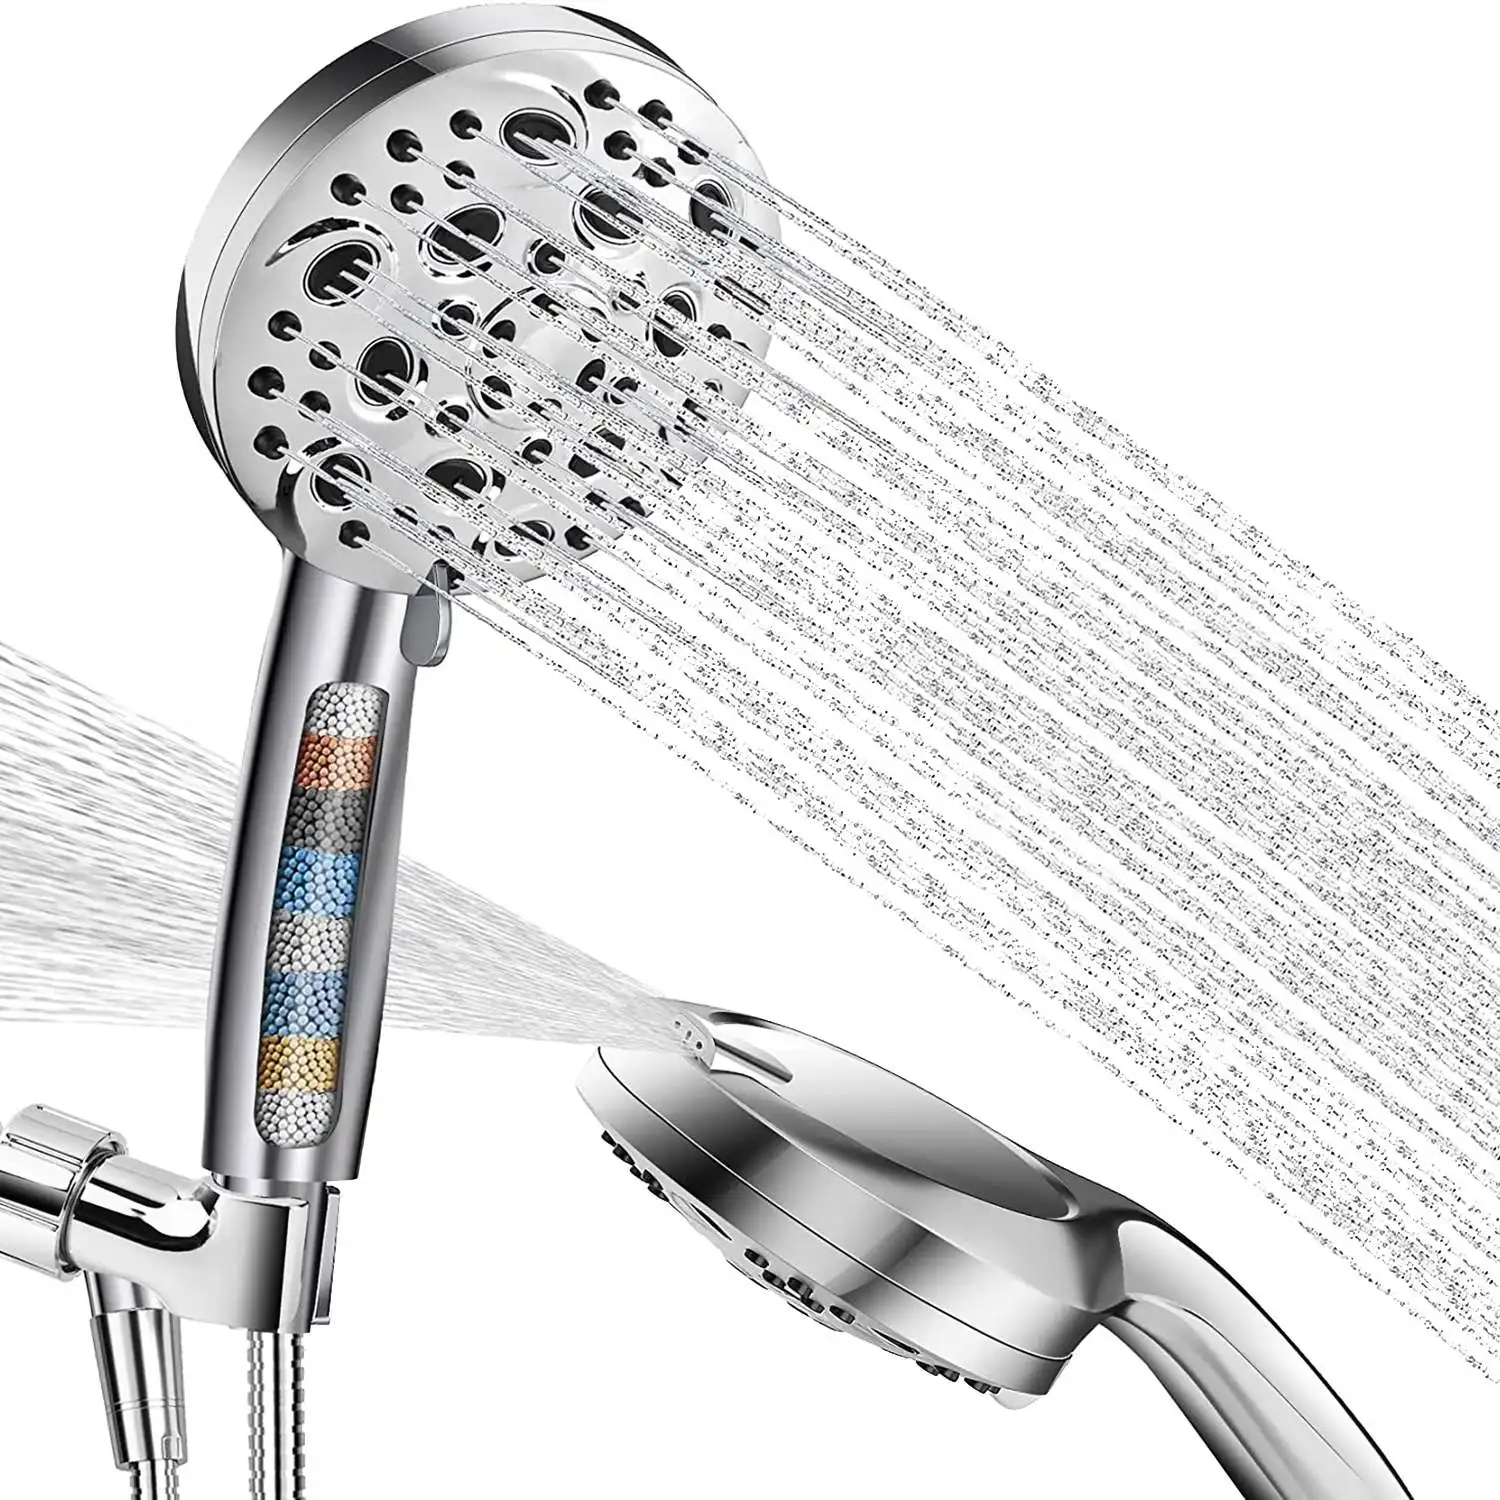 

10 Modes Shower Head with Handheld, Power Wash to Clean Bathroom, 5.04 Inch Rain Showerhead with 80 Inches